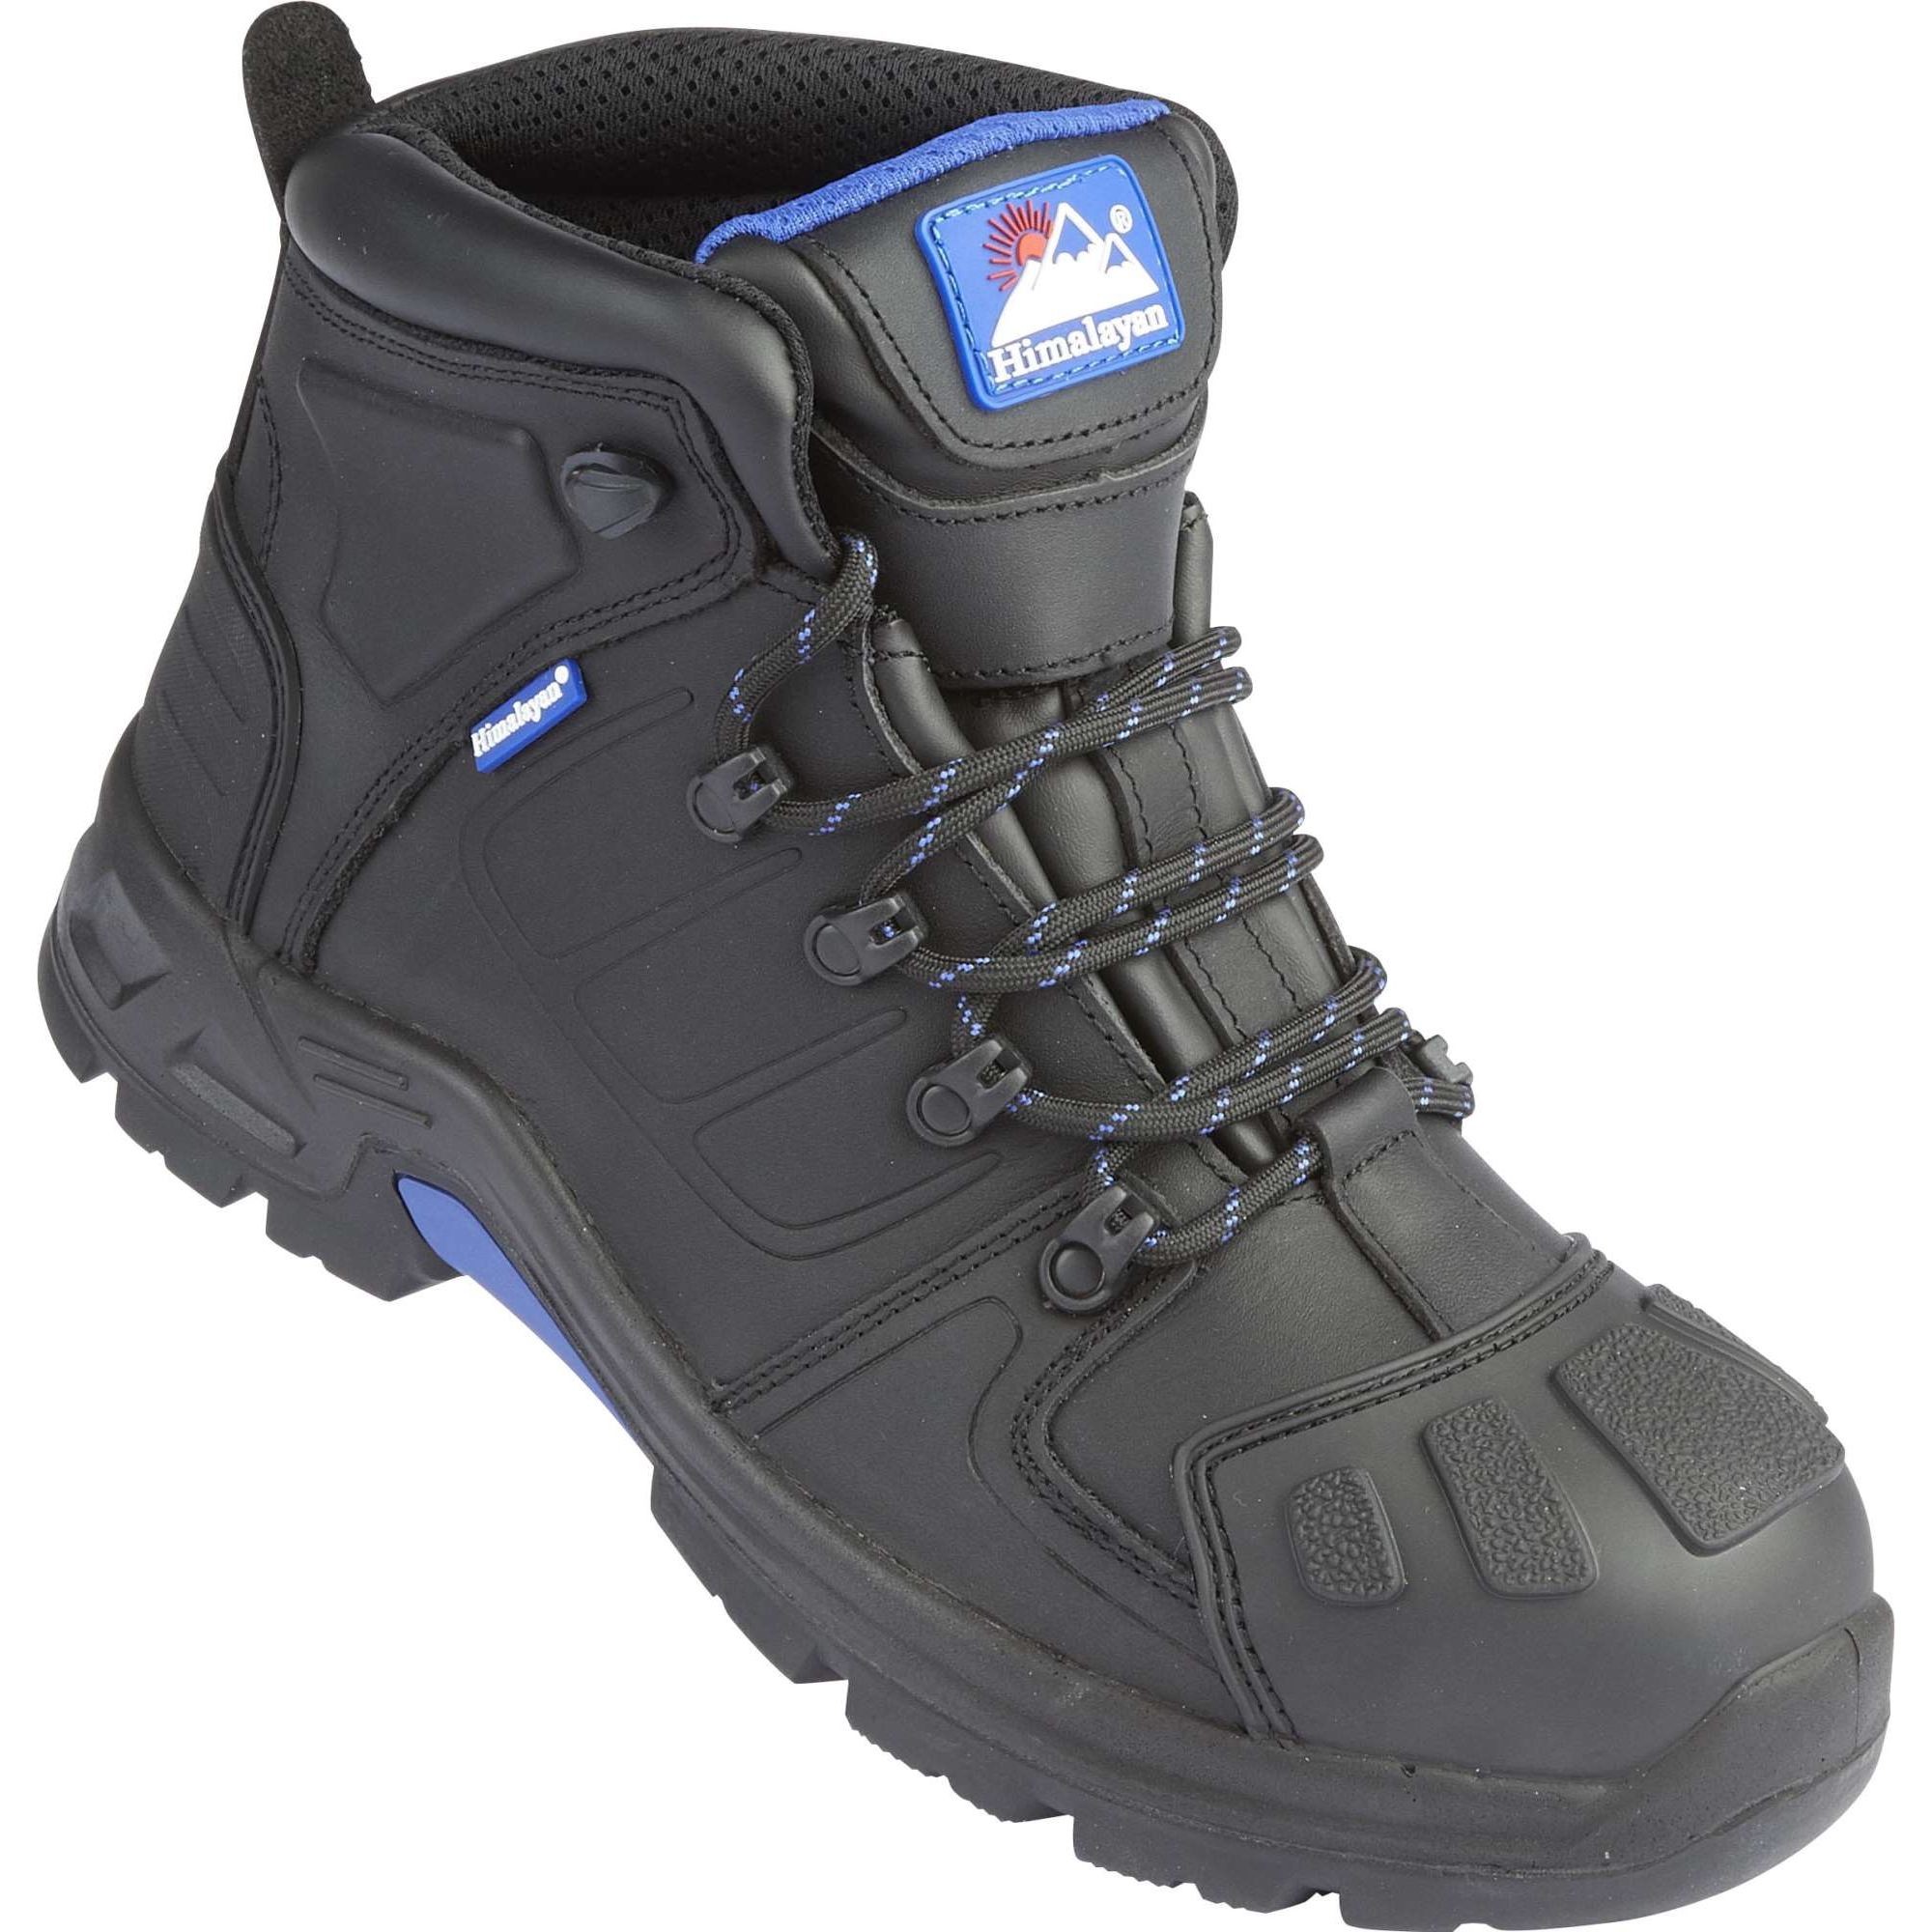 Himalayan Storm S3 Black Leather Waterproof Safety Boots (5209)